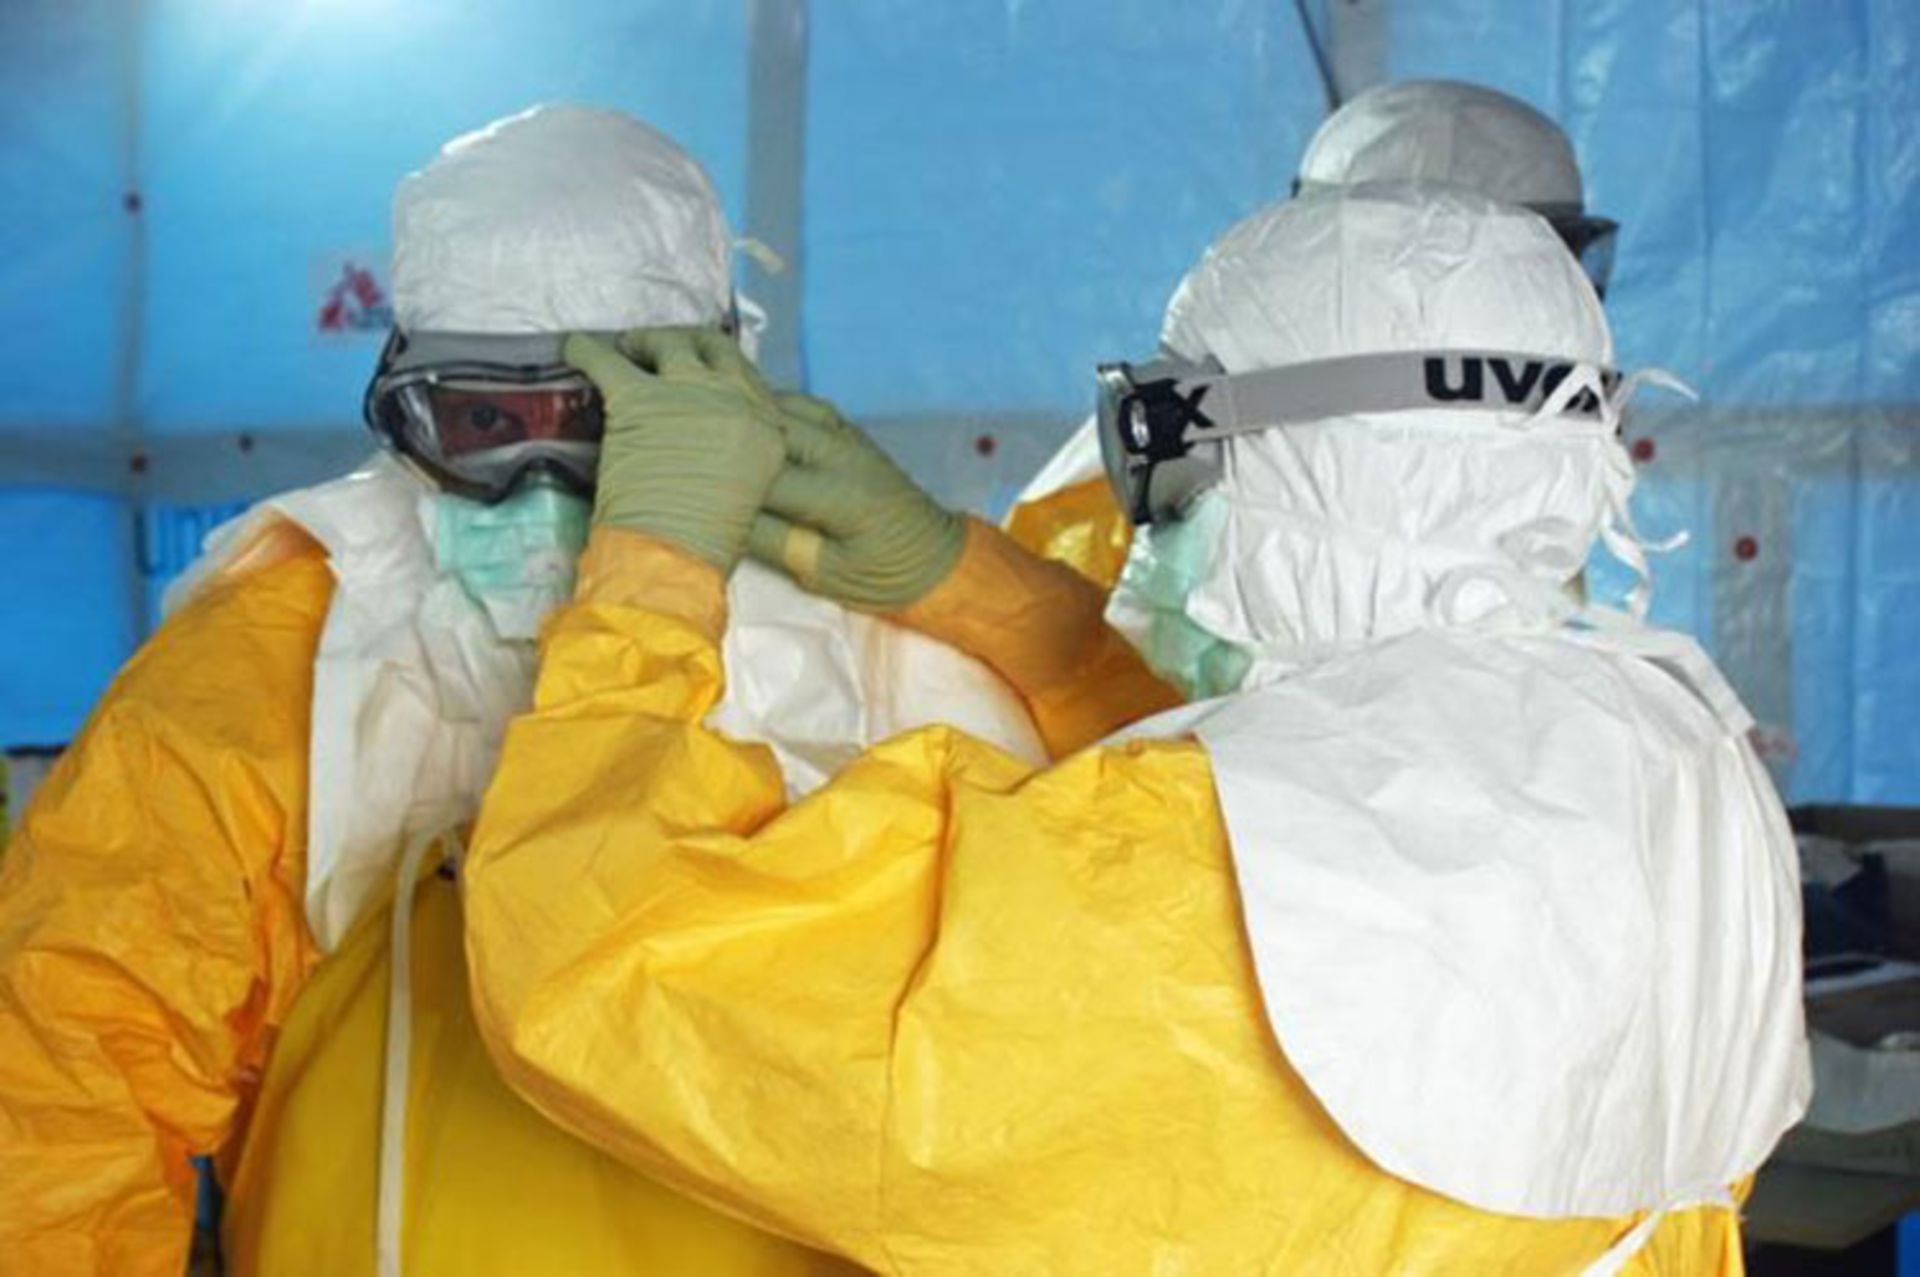 Health care workers put on protective gear before entering an Ebola treatment unit in Liberia